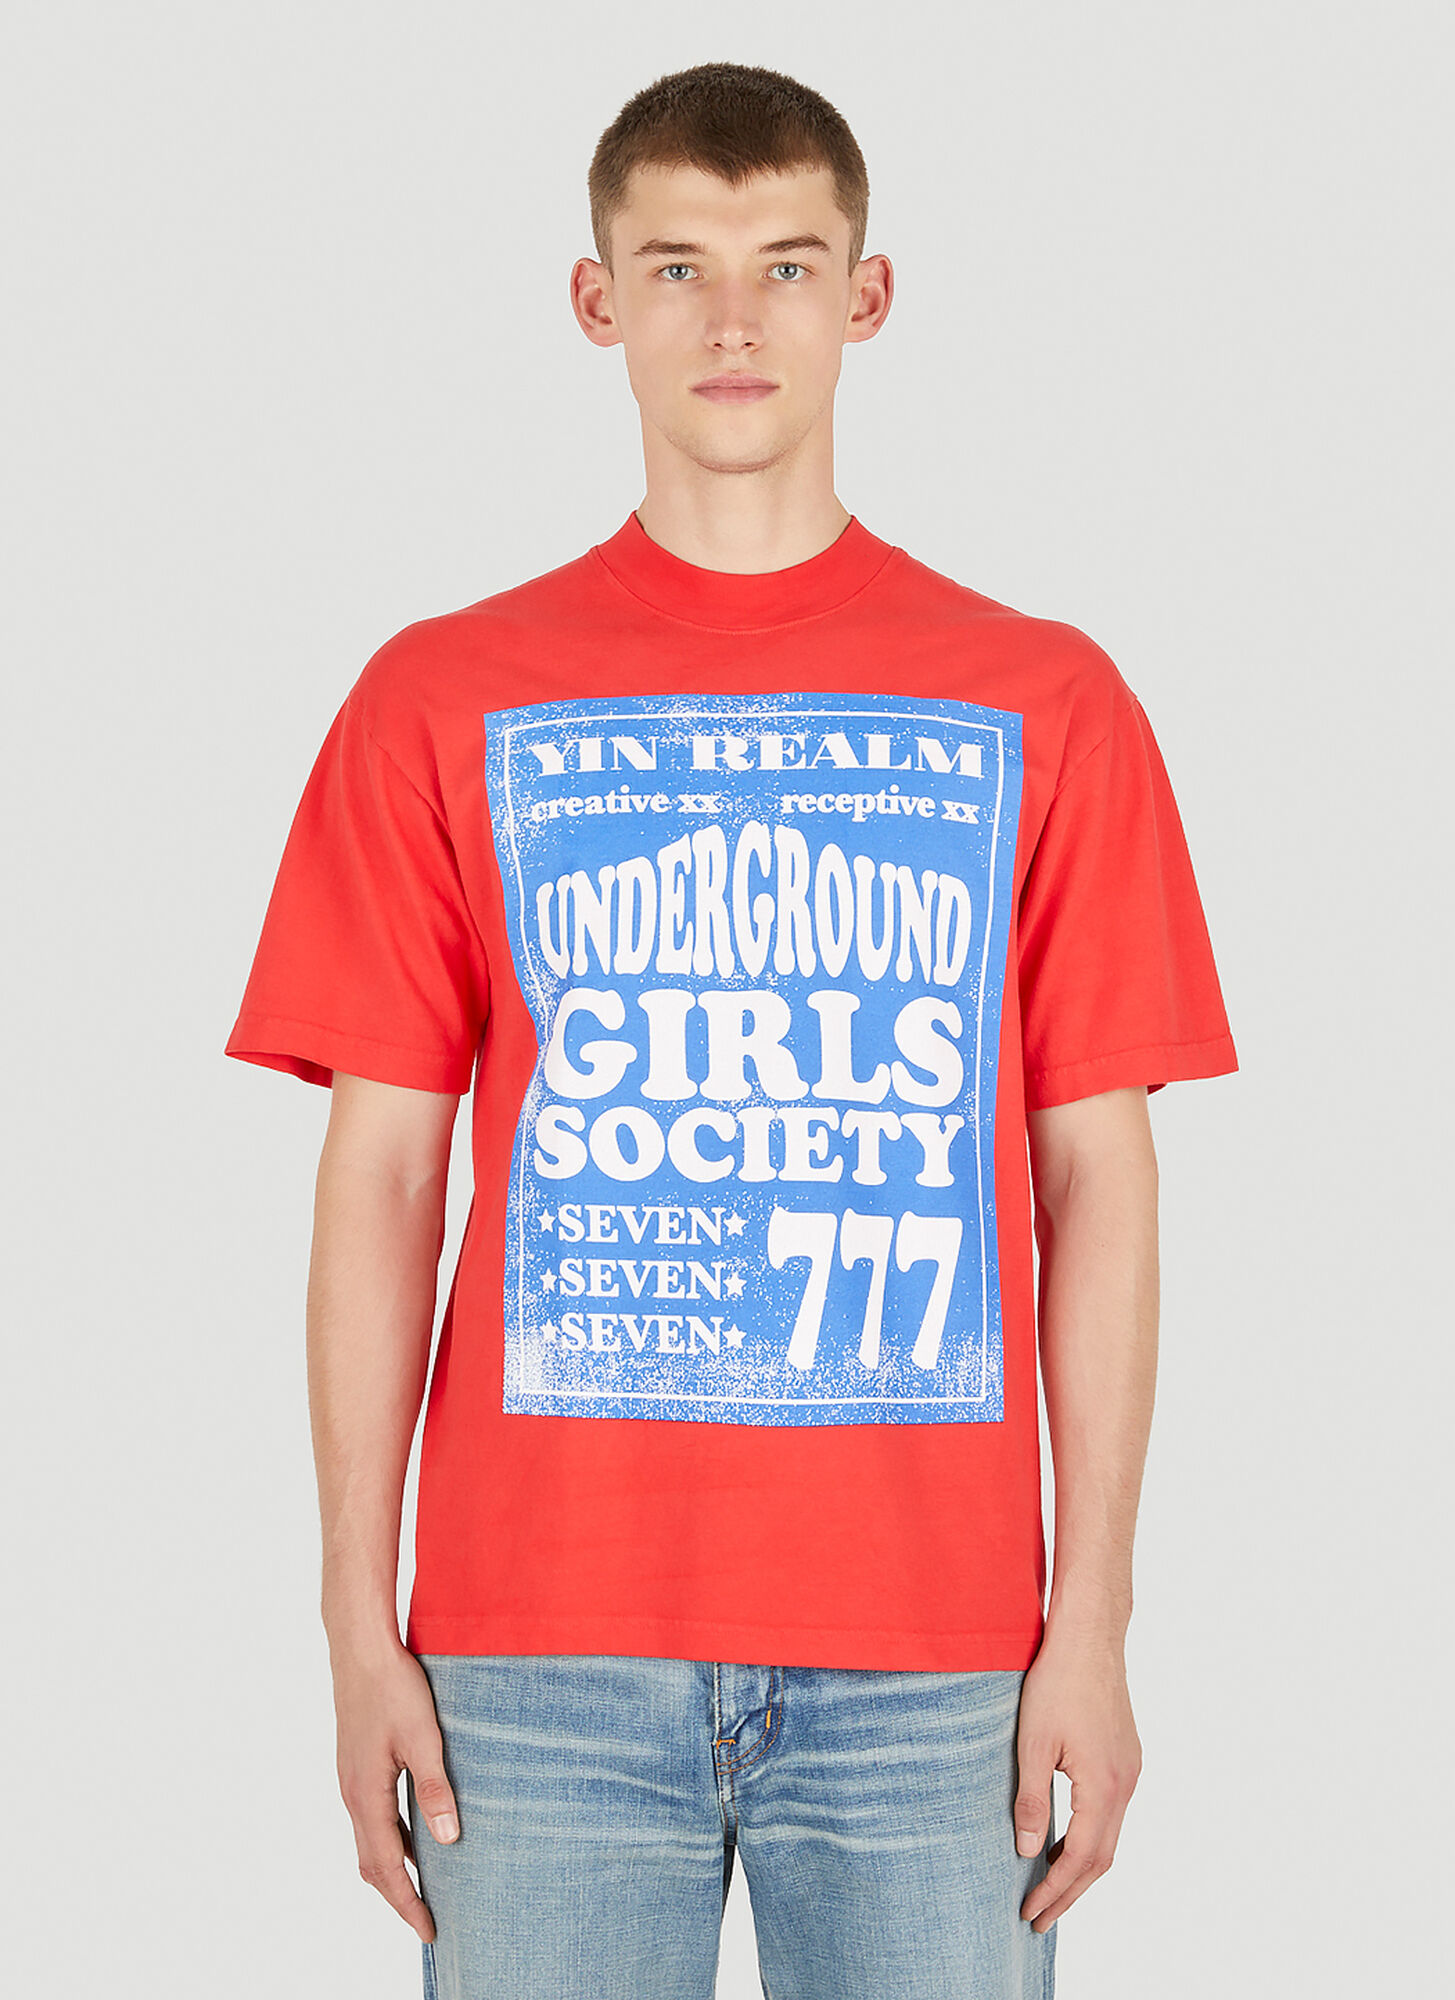 Come Tees Underground Girls Society Raver T-shirt Unisex Red